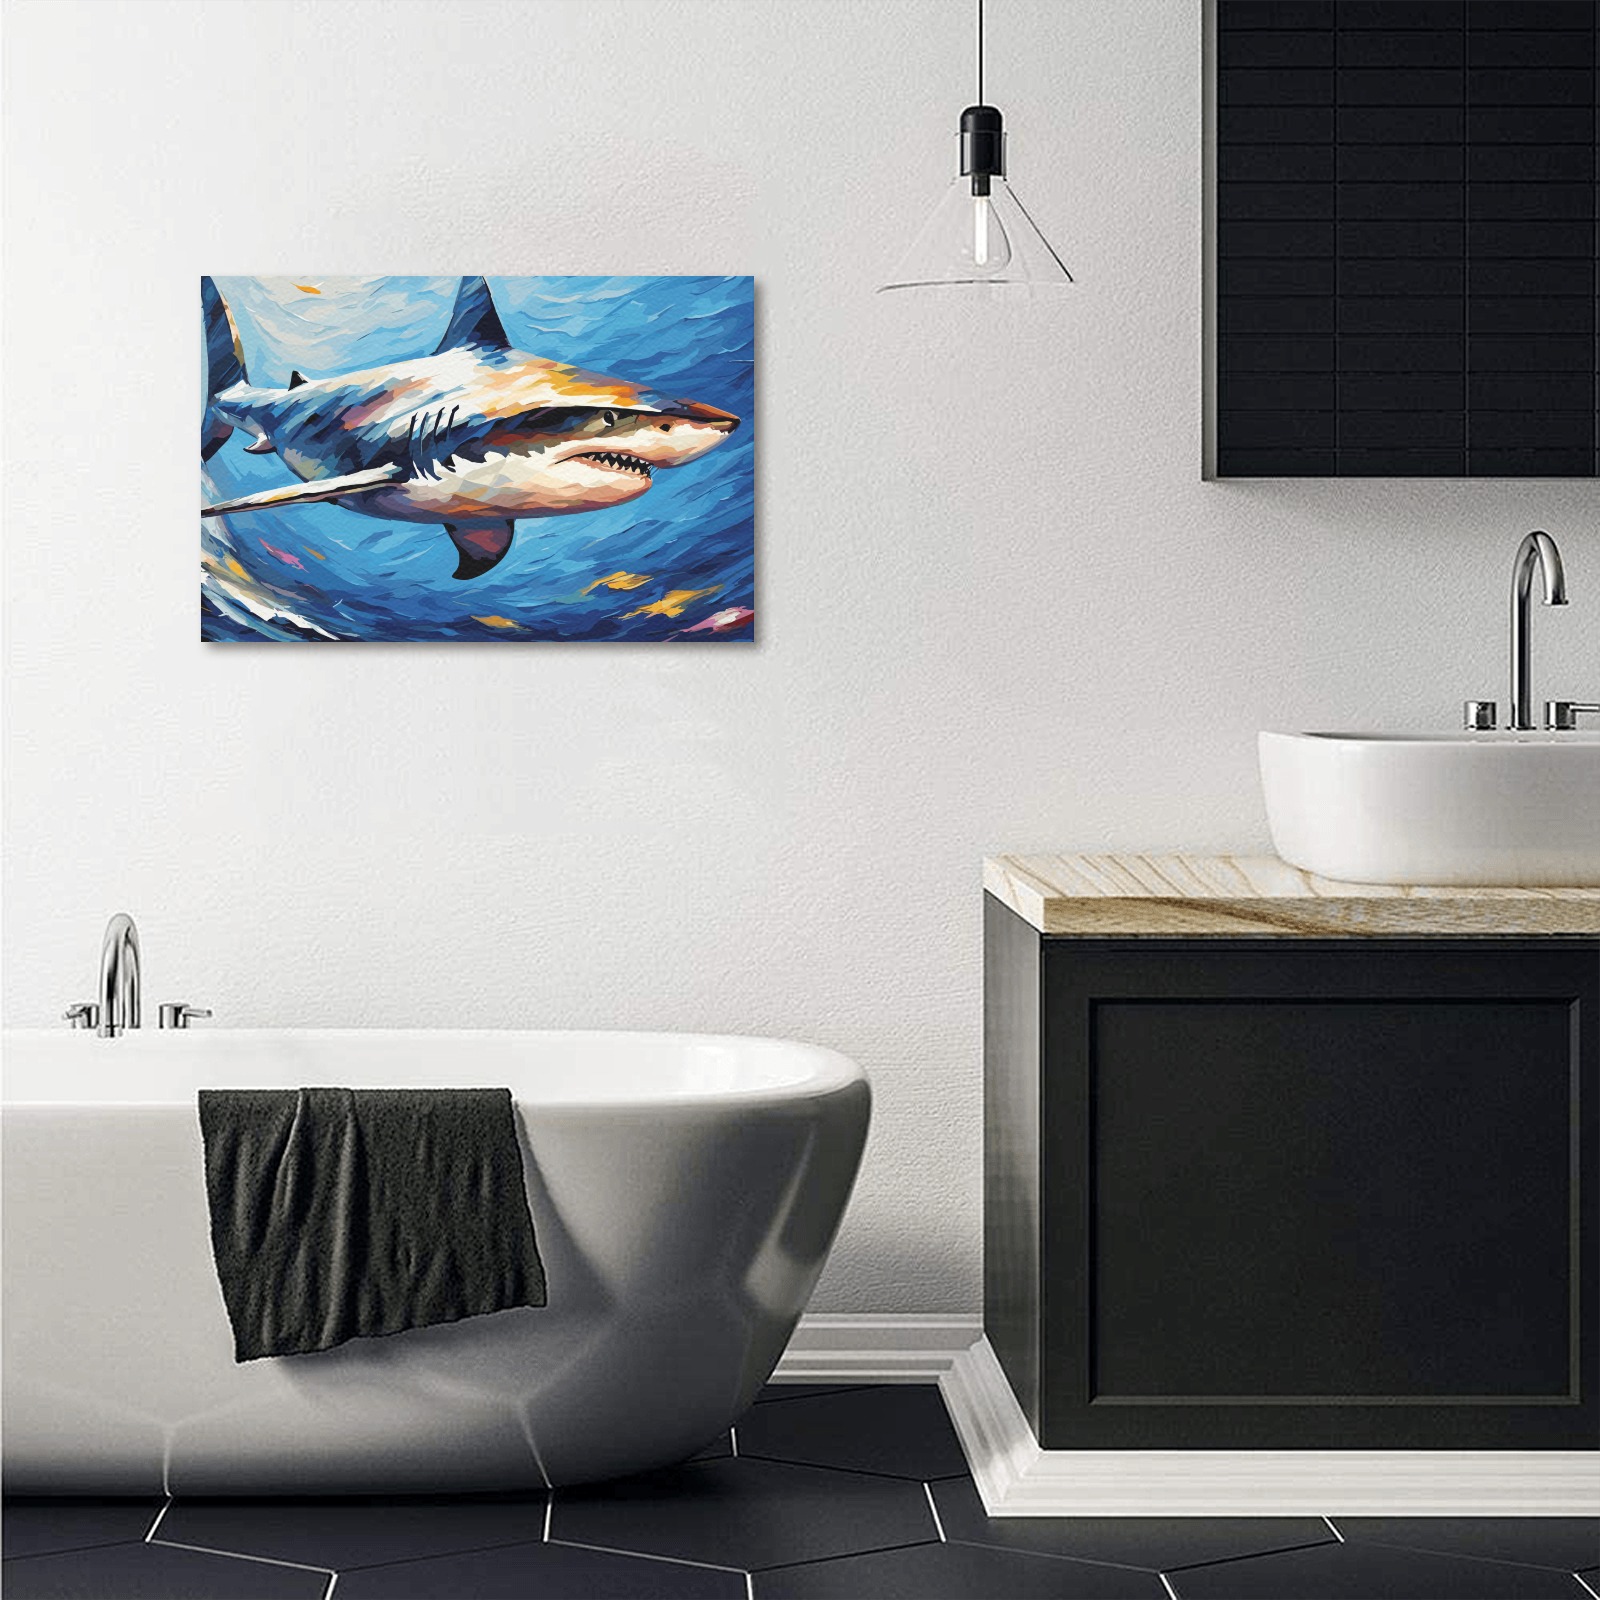 Cool shark surfs the wave under the sea chic art. Upgraded Canvas Print 18"x12"